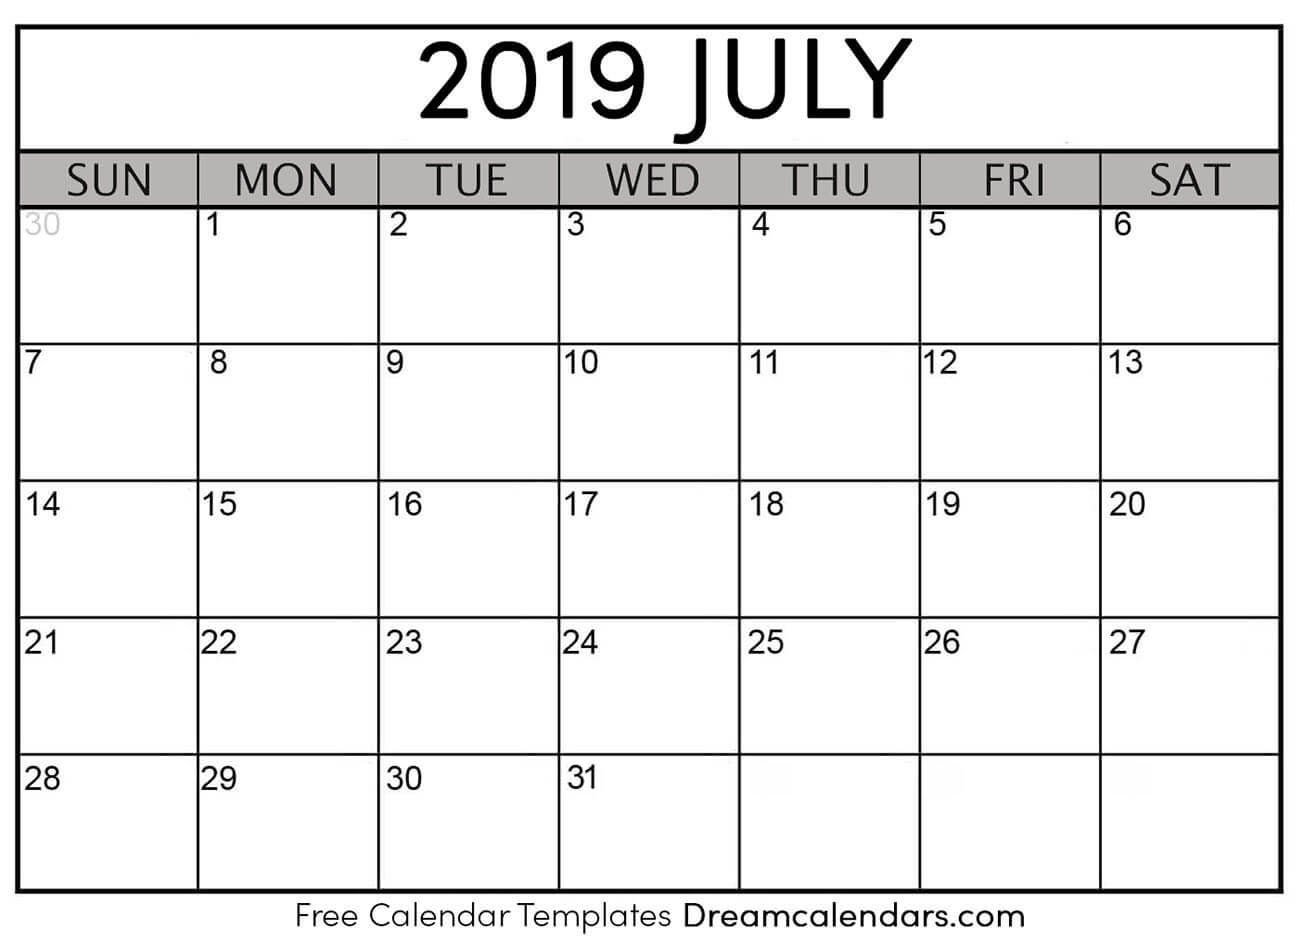 July 2019 Calendar - Free Printable with Holidays and Observances